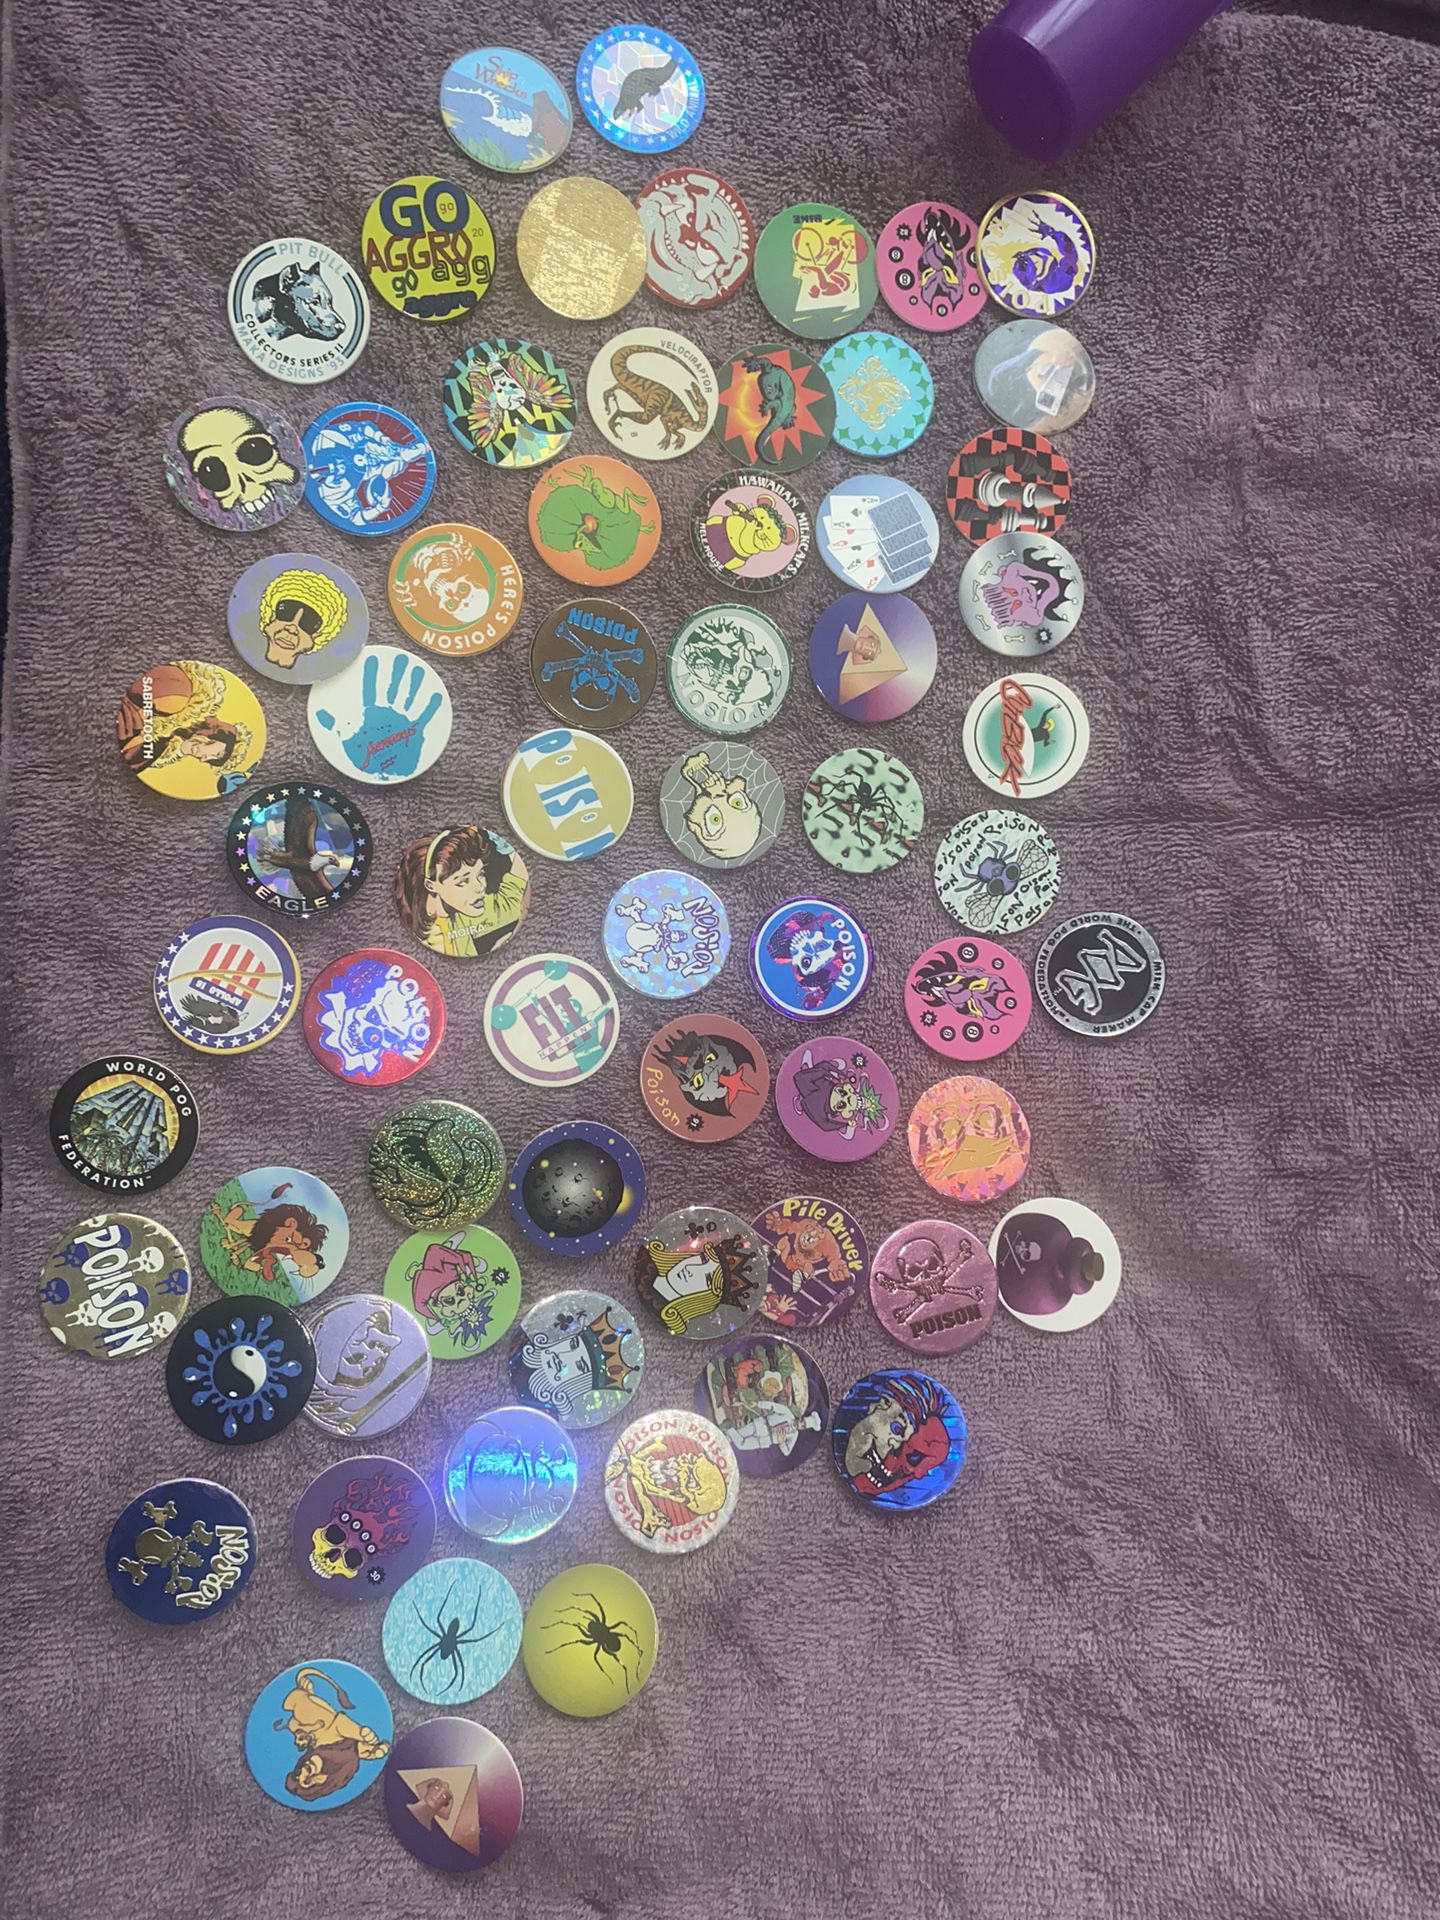 1994 VINTAGE POGS 1994 Collectors Items OR BEST OFFER 